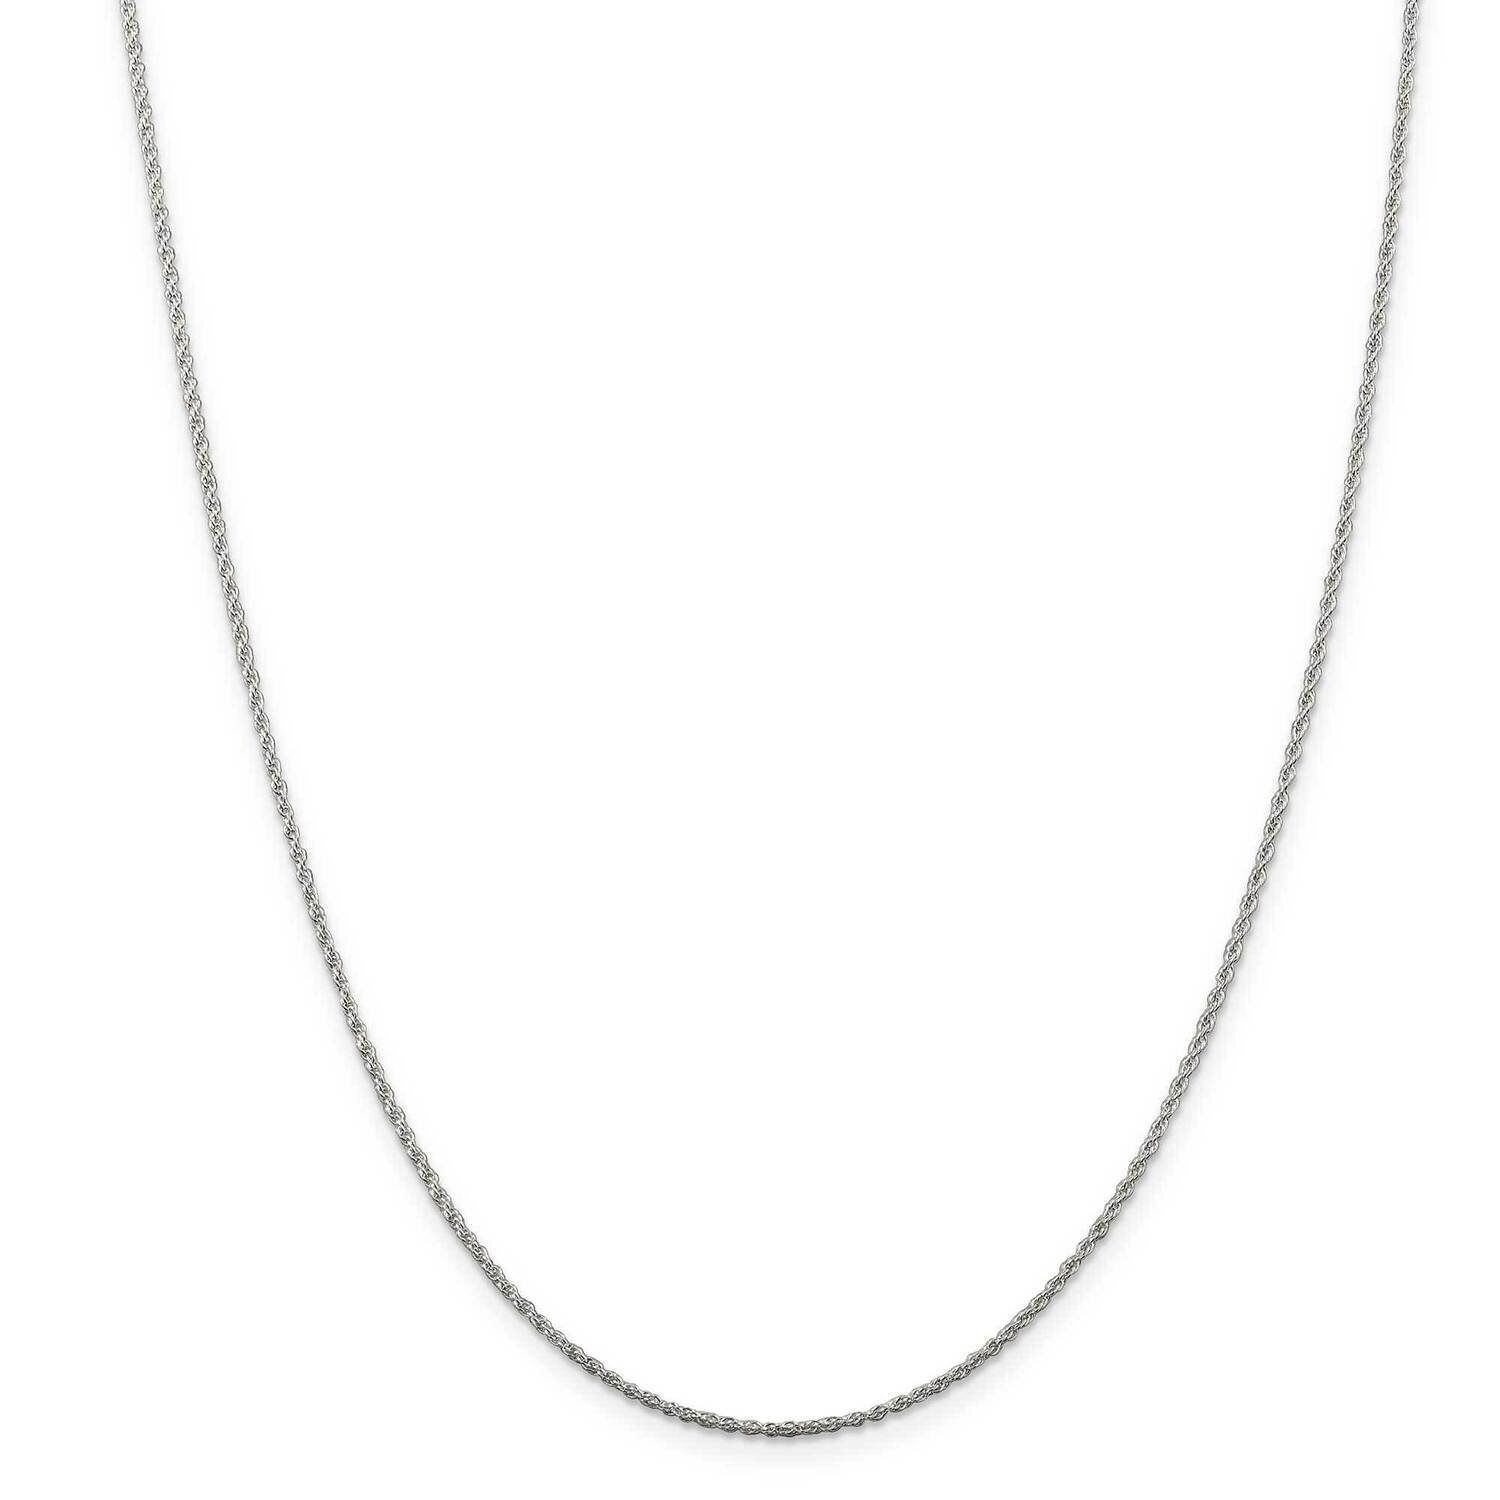 1.3mm Loose Rope Chain with 4 Inch Extender 22 Inch Sterling Silver Rhodium-Plated QFC67RH-22